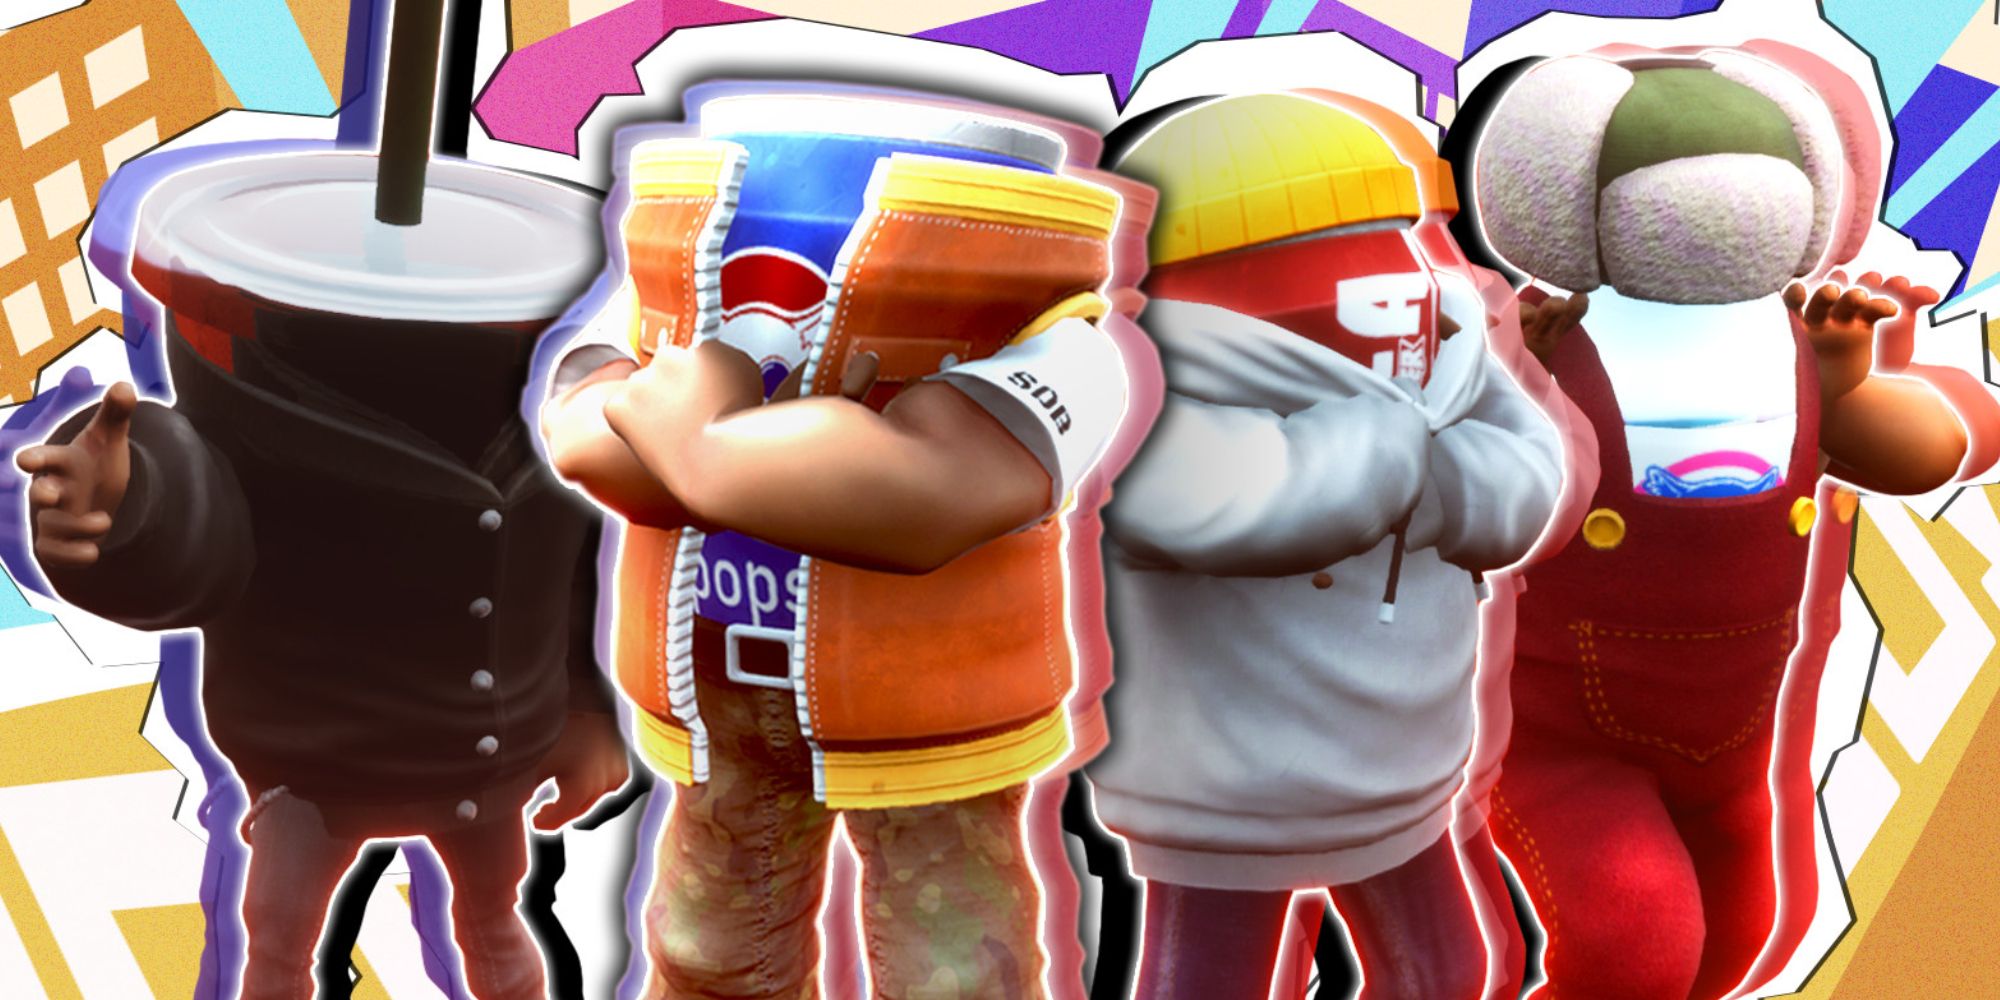 an image of various fighters from Super Drink Bros that resemble cans, bottles and cups lined up wearing assorted clothing against a colourful background